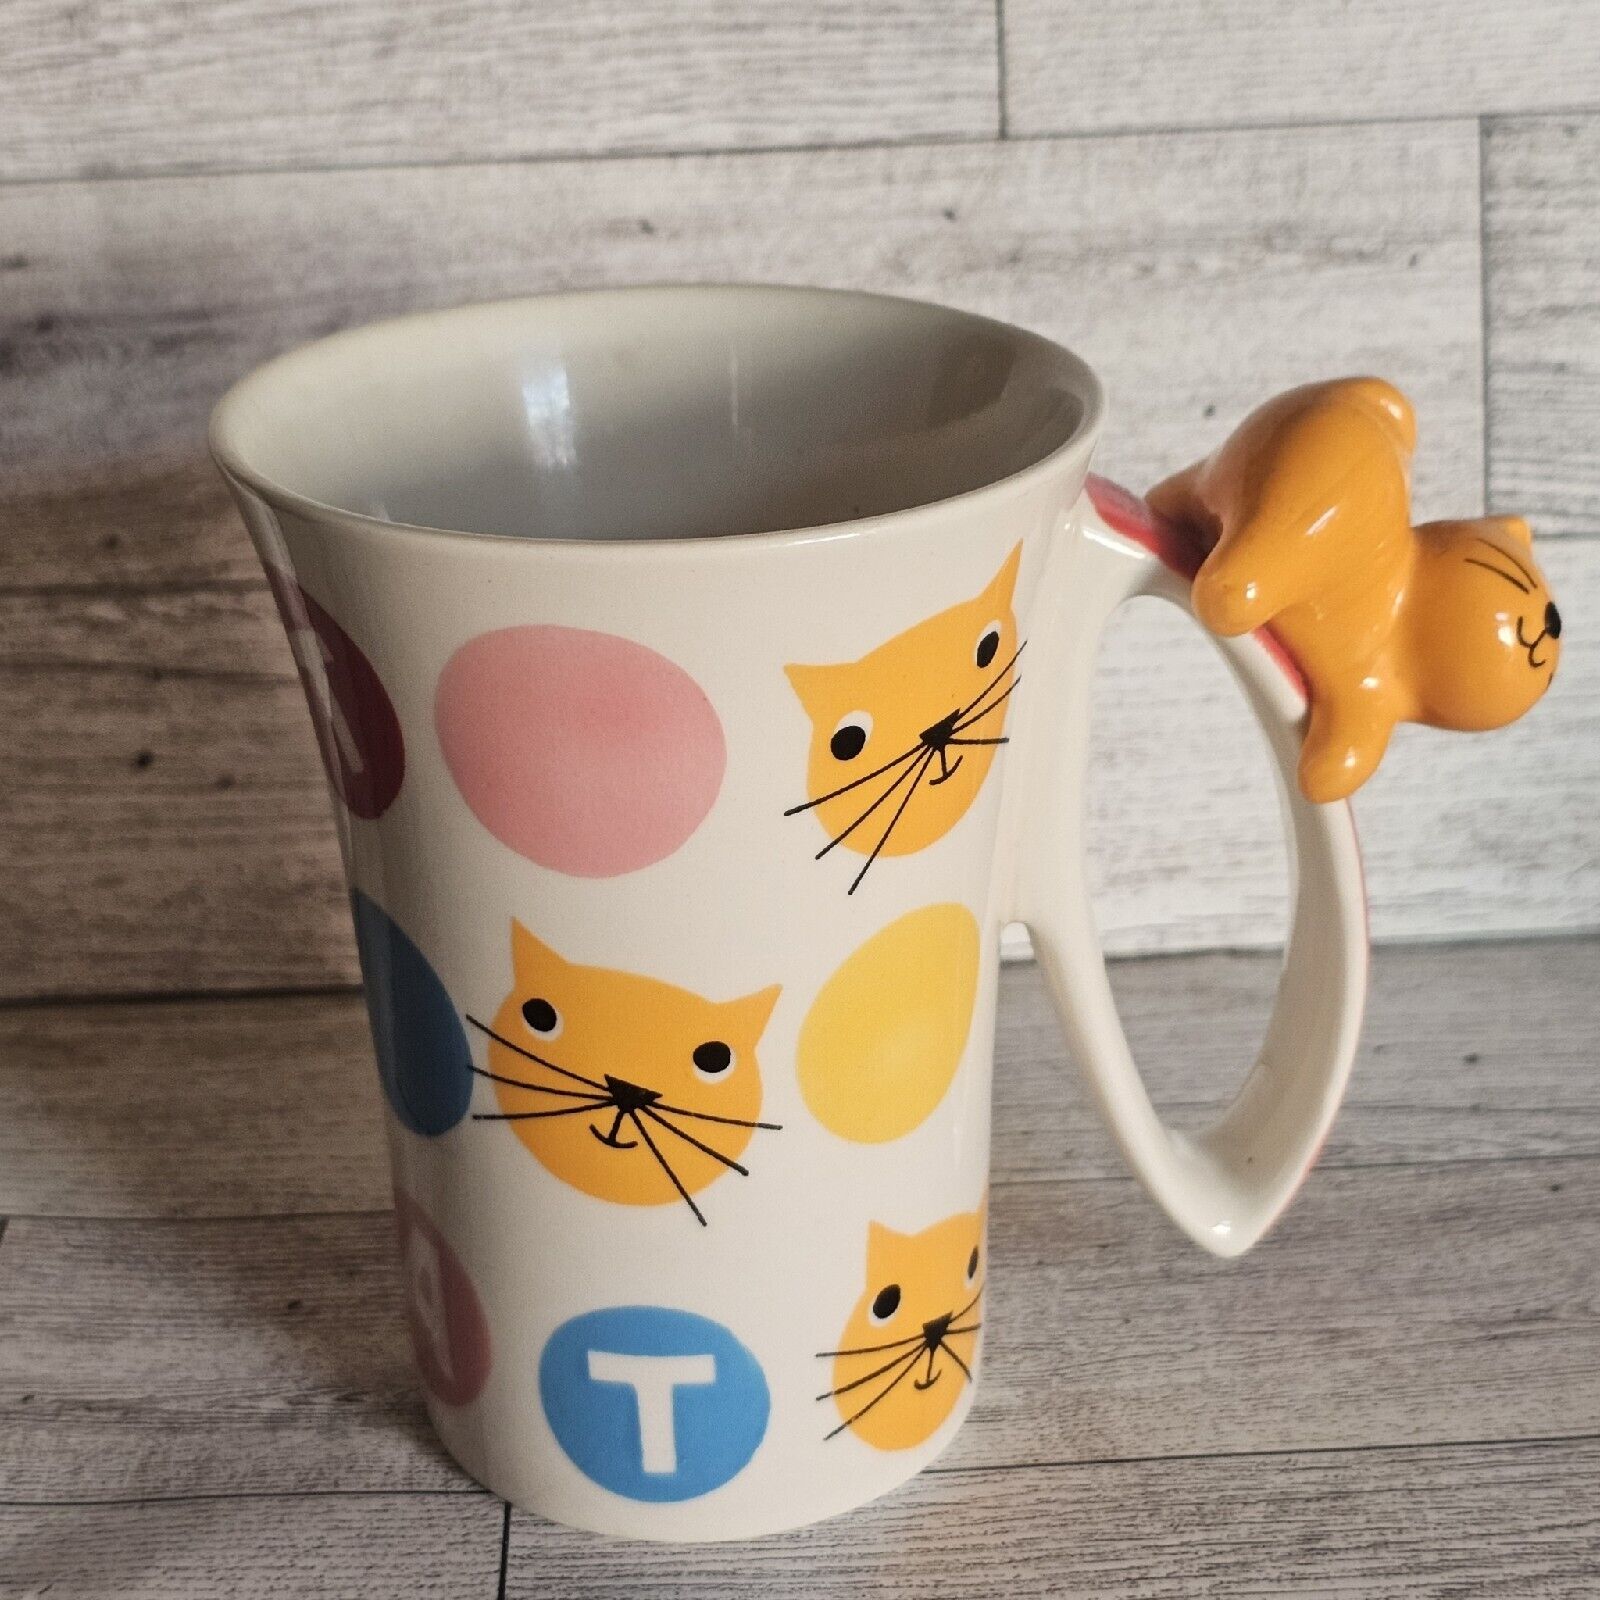 Indra Cat Hand Painted Mug Kitty on Handle 3D Colorful Polka Dots Garfield Cat